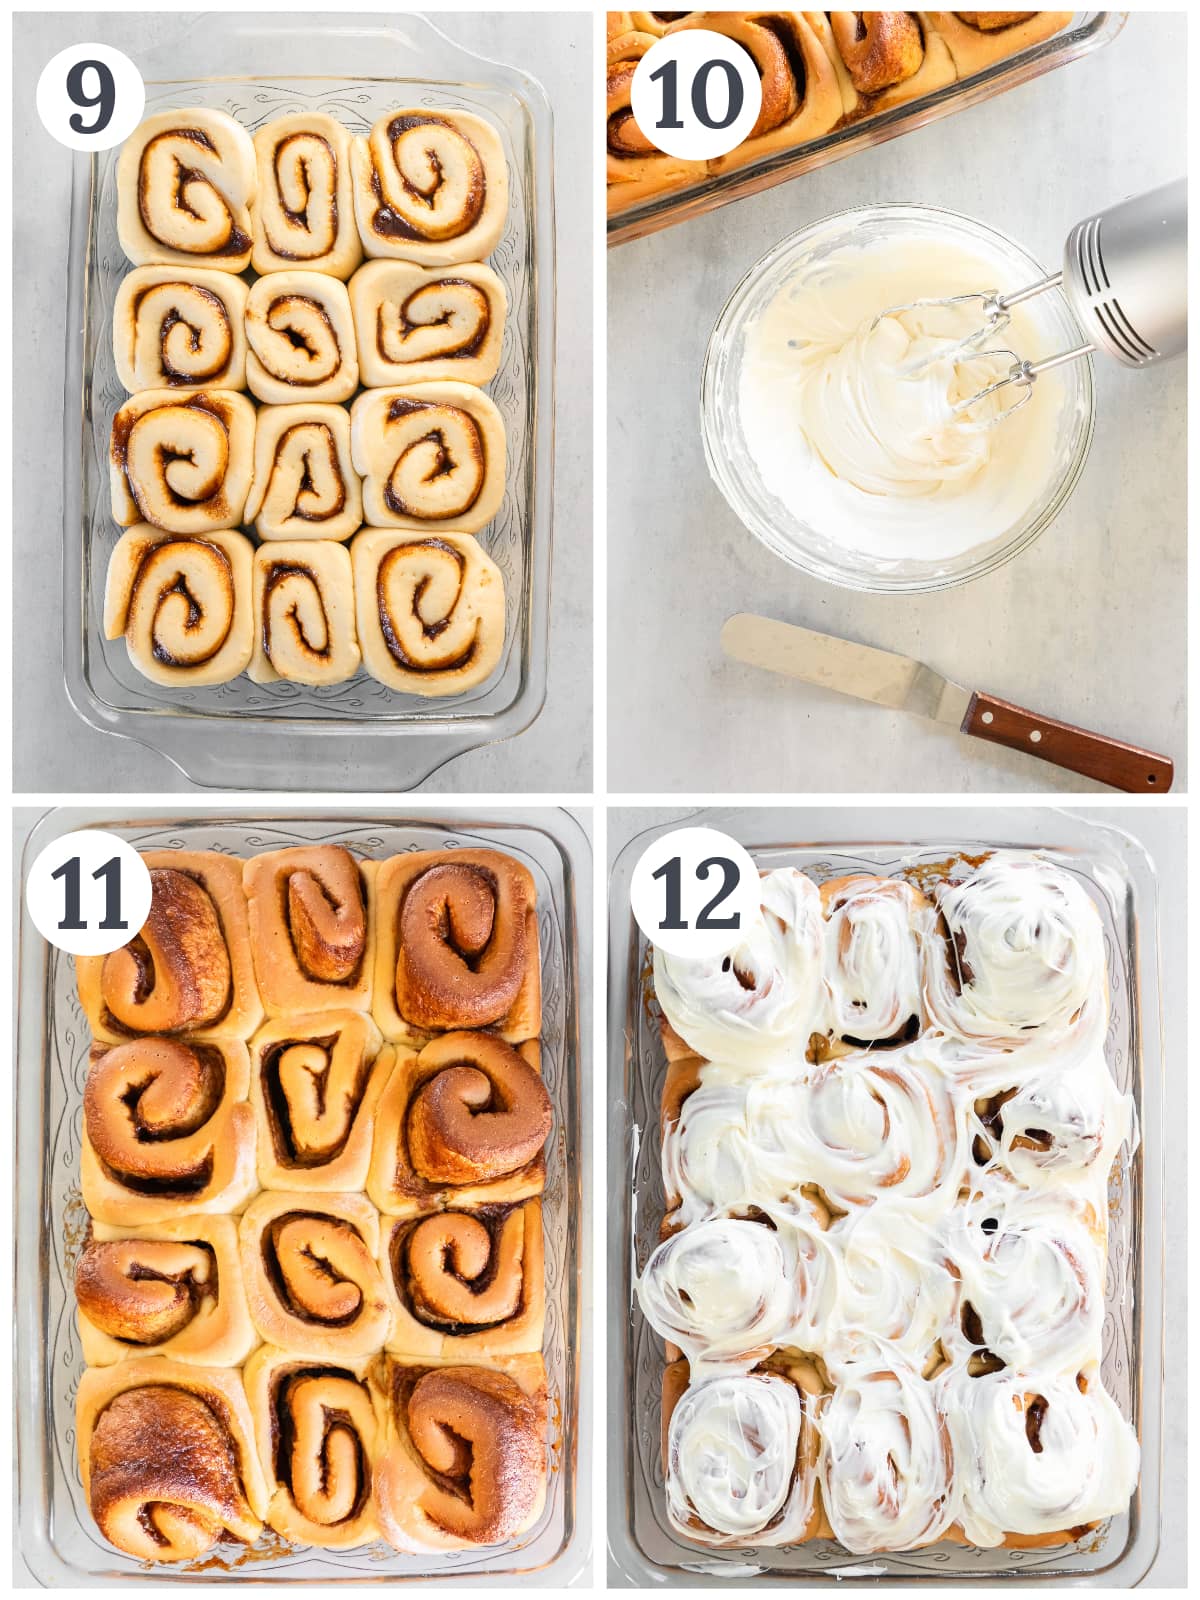 photo collage demonstrating how to bake cinnamon rolls and make cream cheese icing.